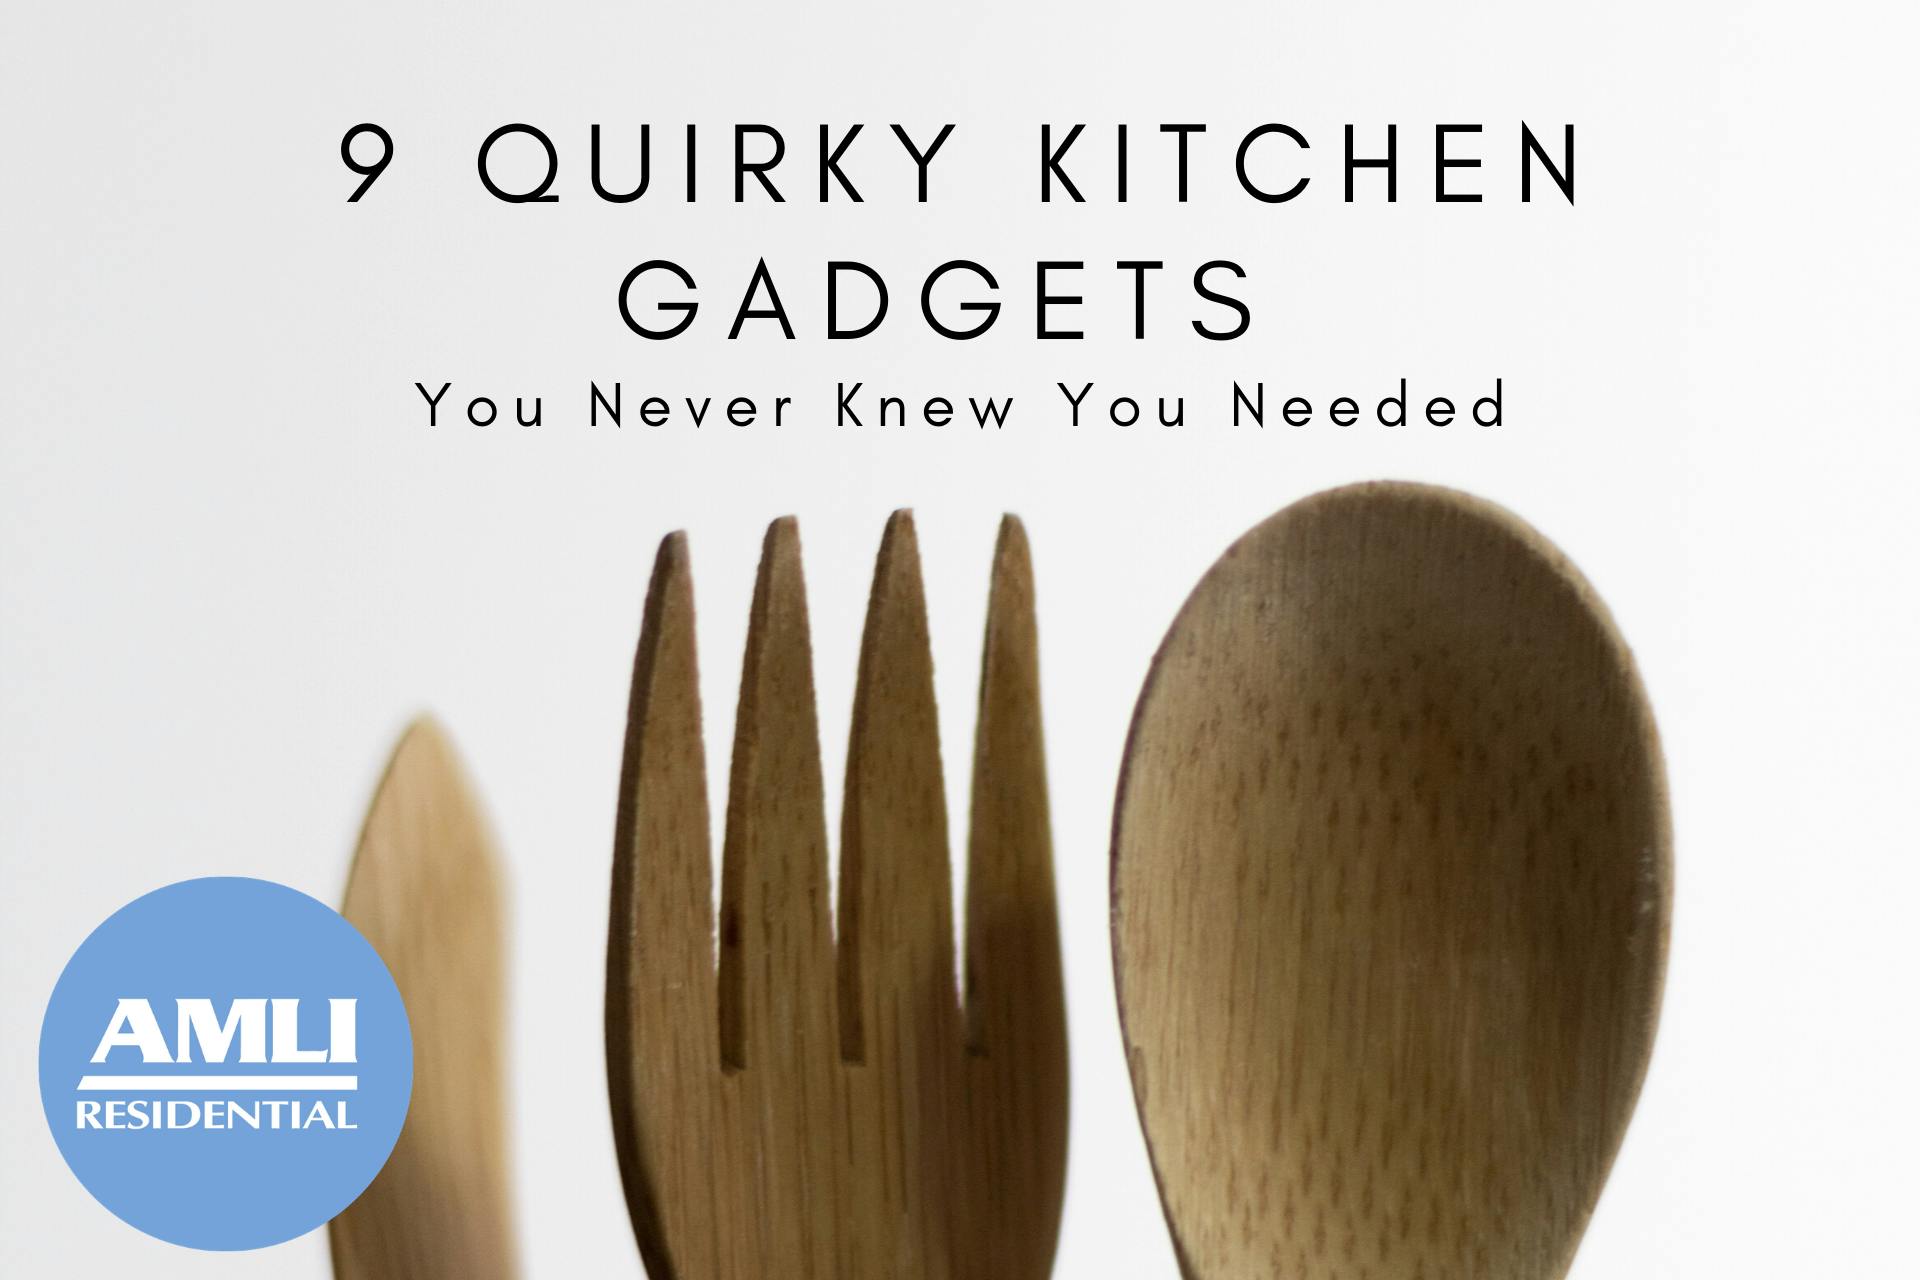 9 Quirky Kitchen Gadgets You Never Knew You Needed